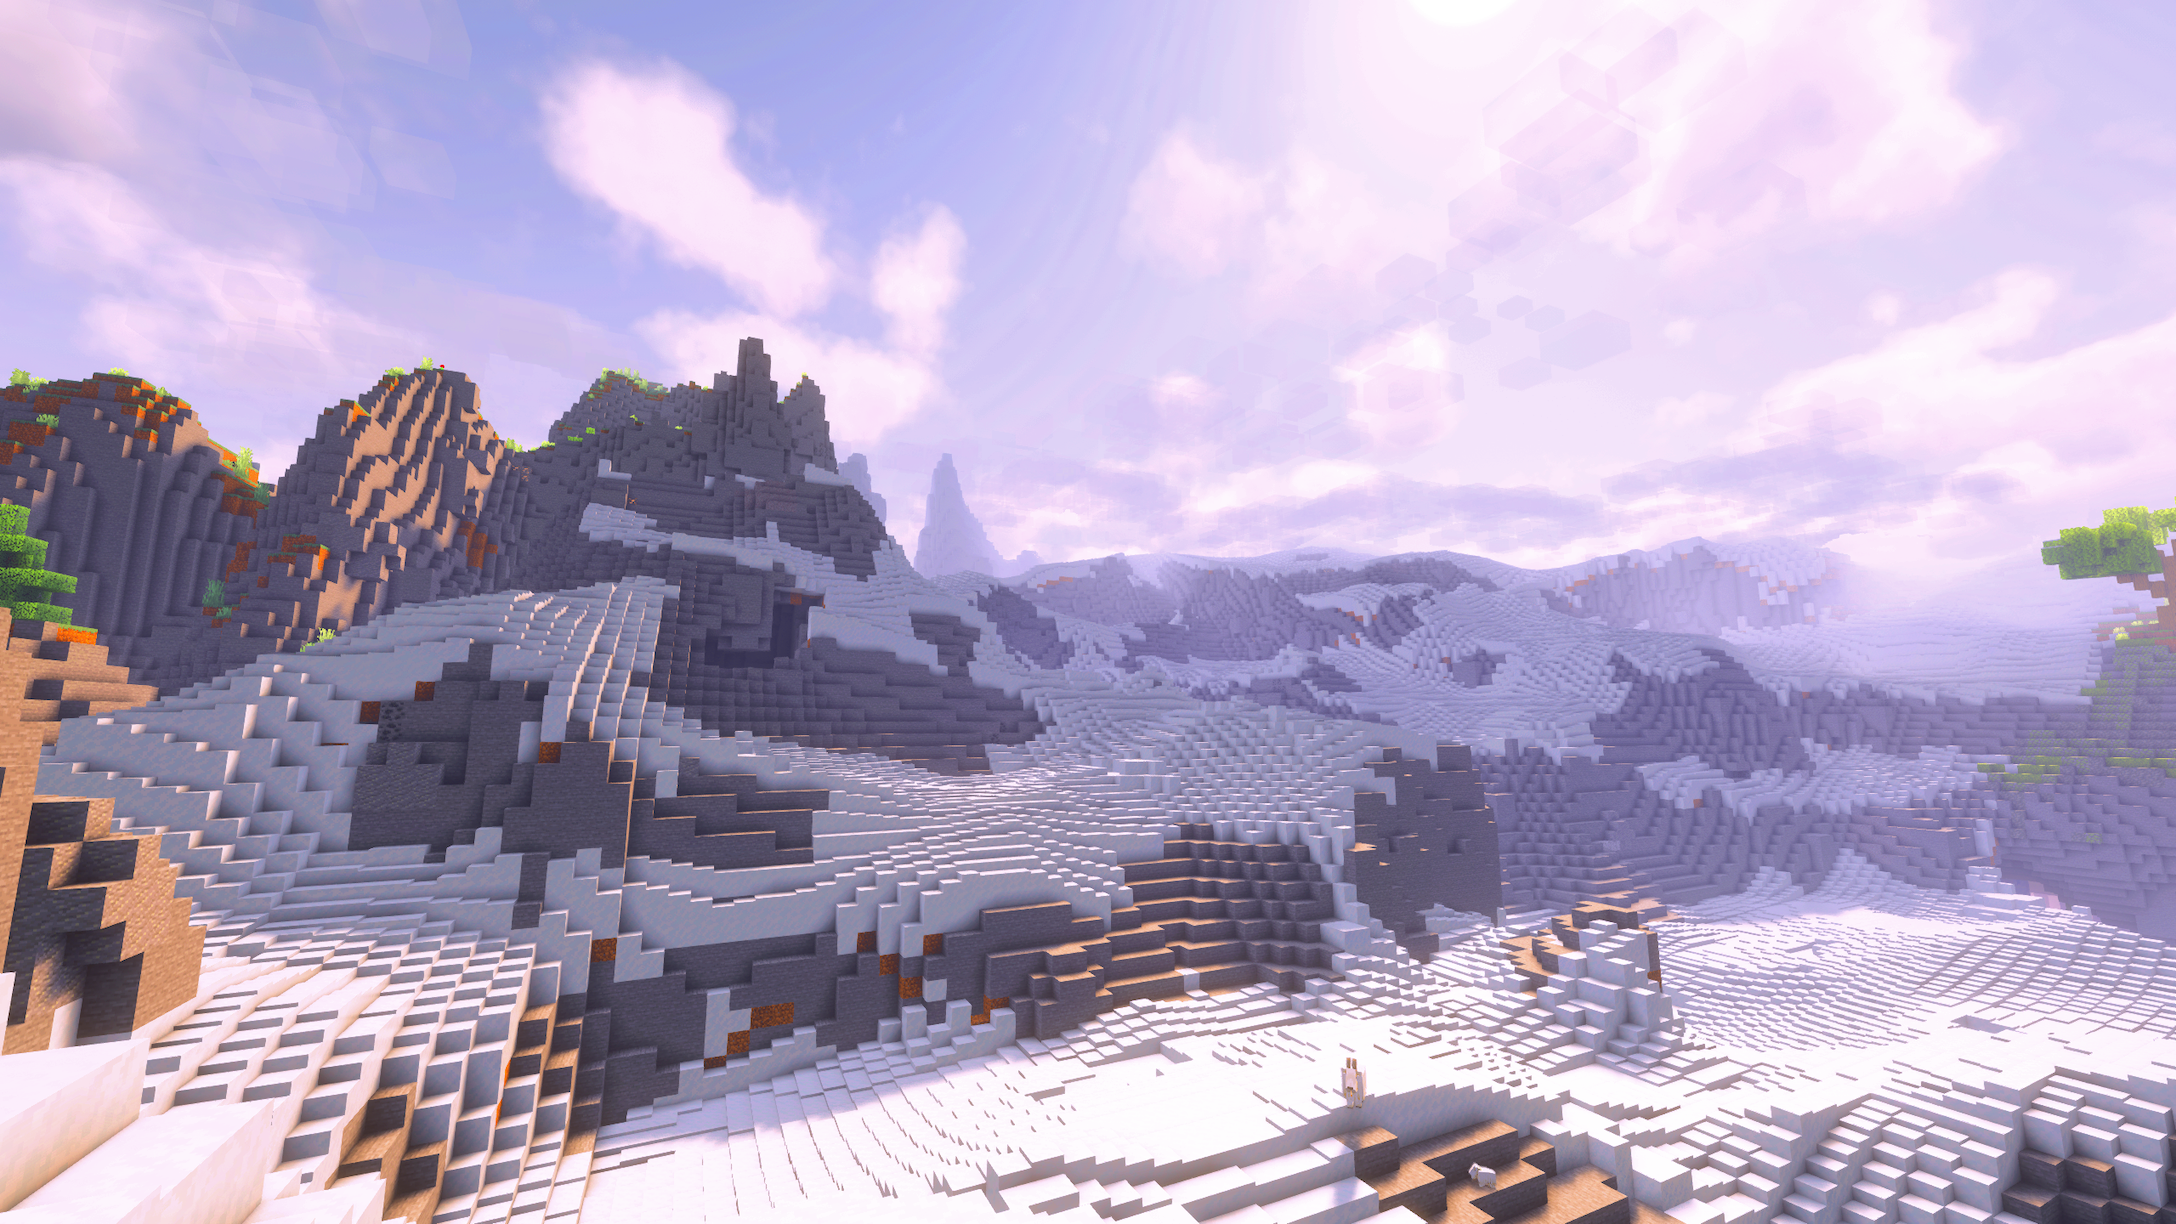 Snowy eroded mountains